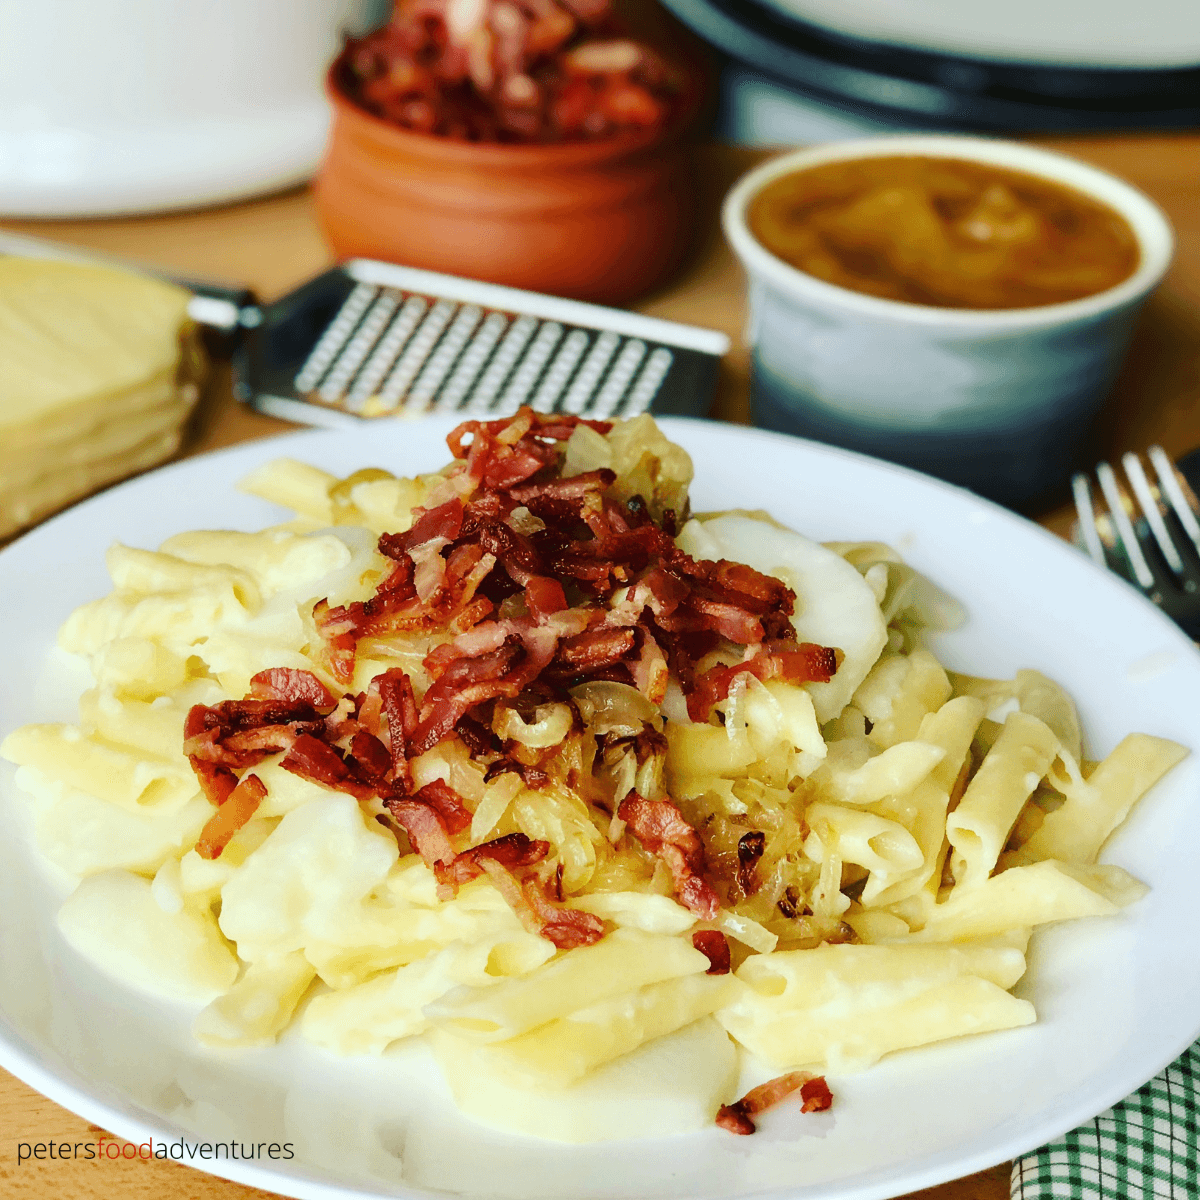 Aelplermagronen - Swiss Mac and Cheese is the ultimate Alpine comfort food. Macaroni, Swiss cheese, potatoes, caramelized onions, and bacon, served with apple sauce. Your family will love this dinner recipe! Swiss Mac and Cheese with Potatoes (Älplermagronen)